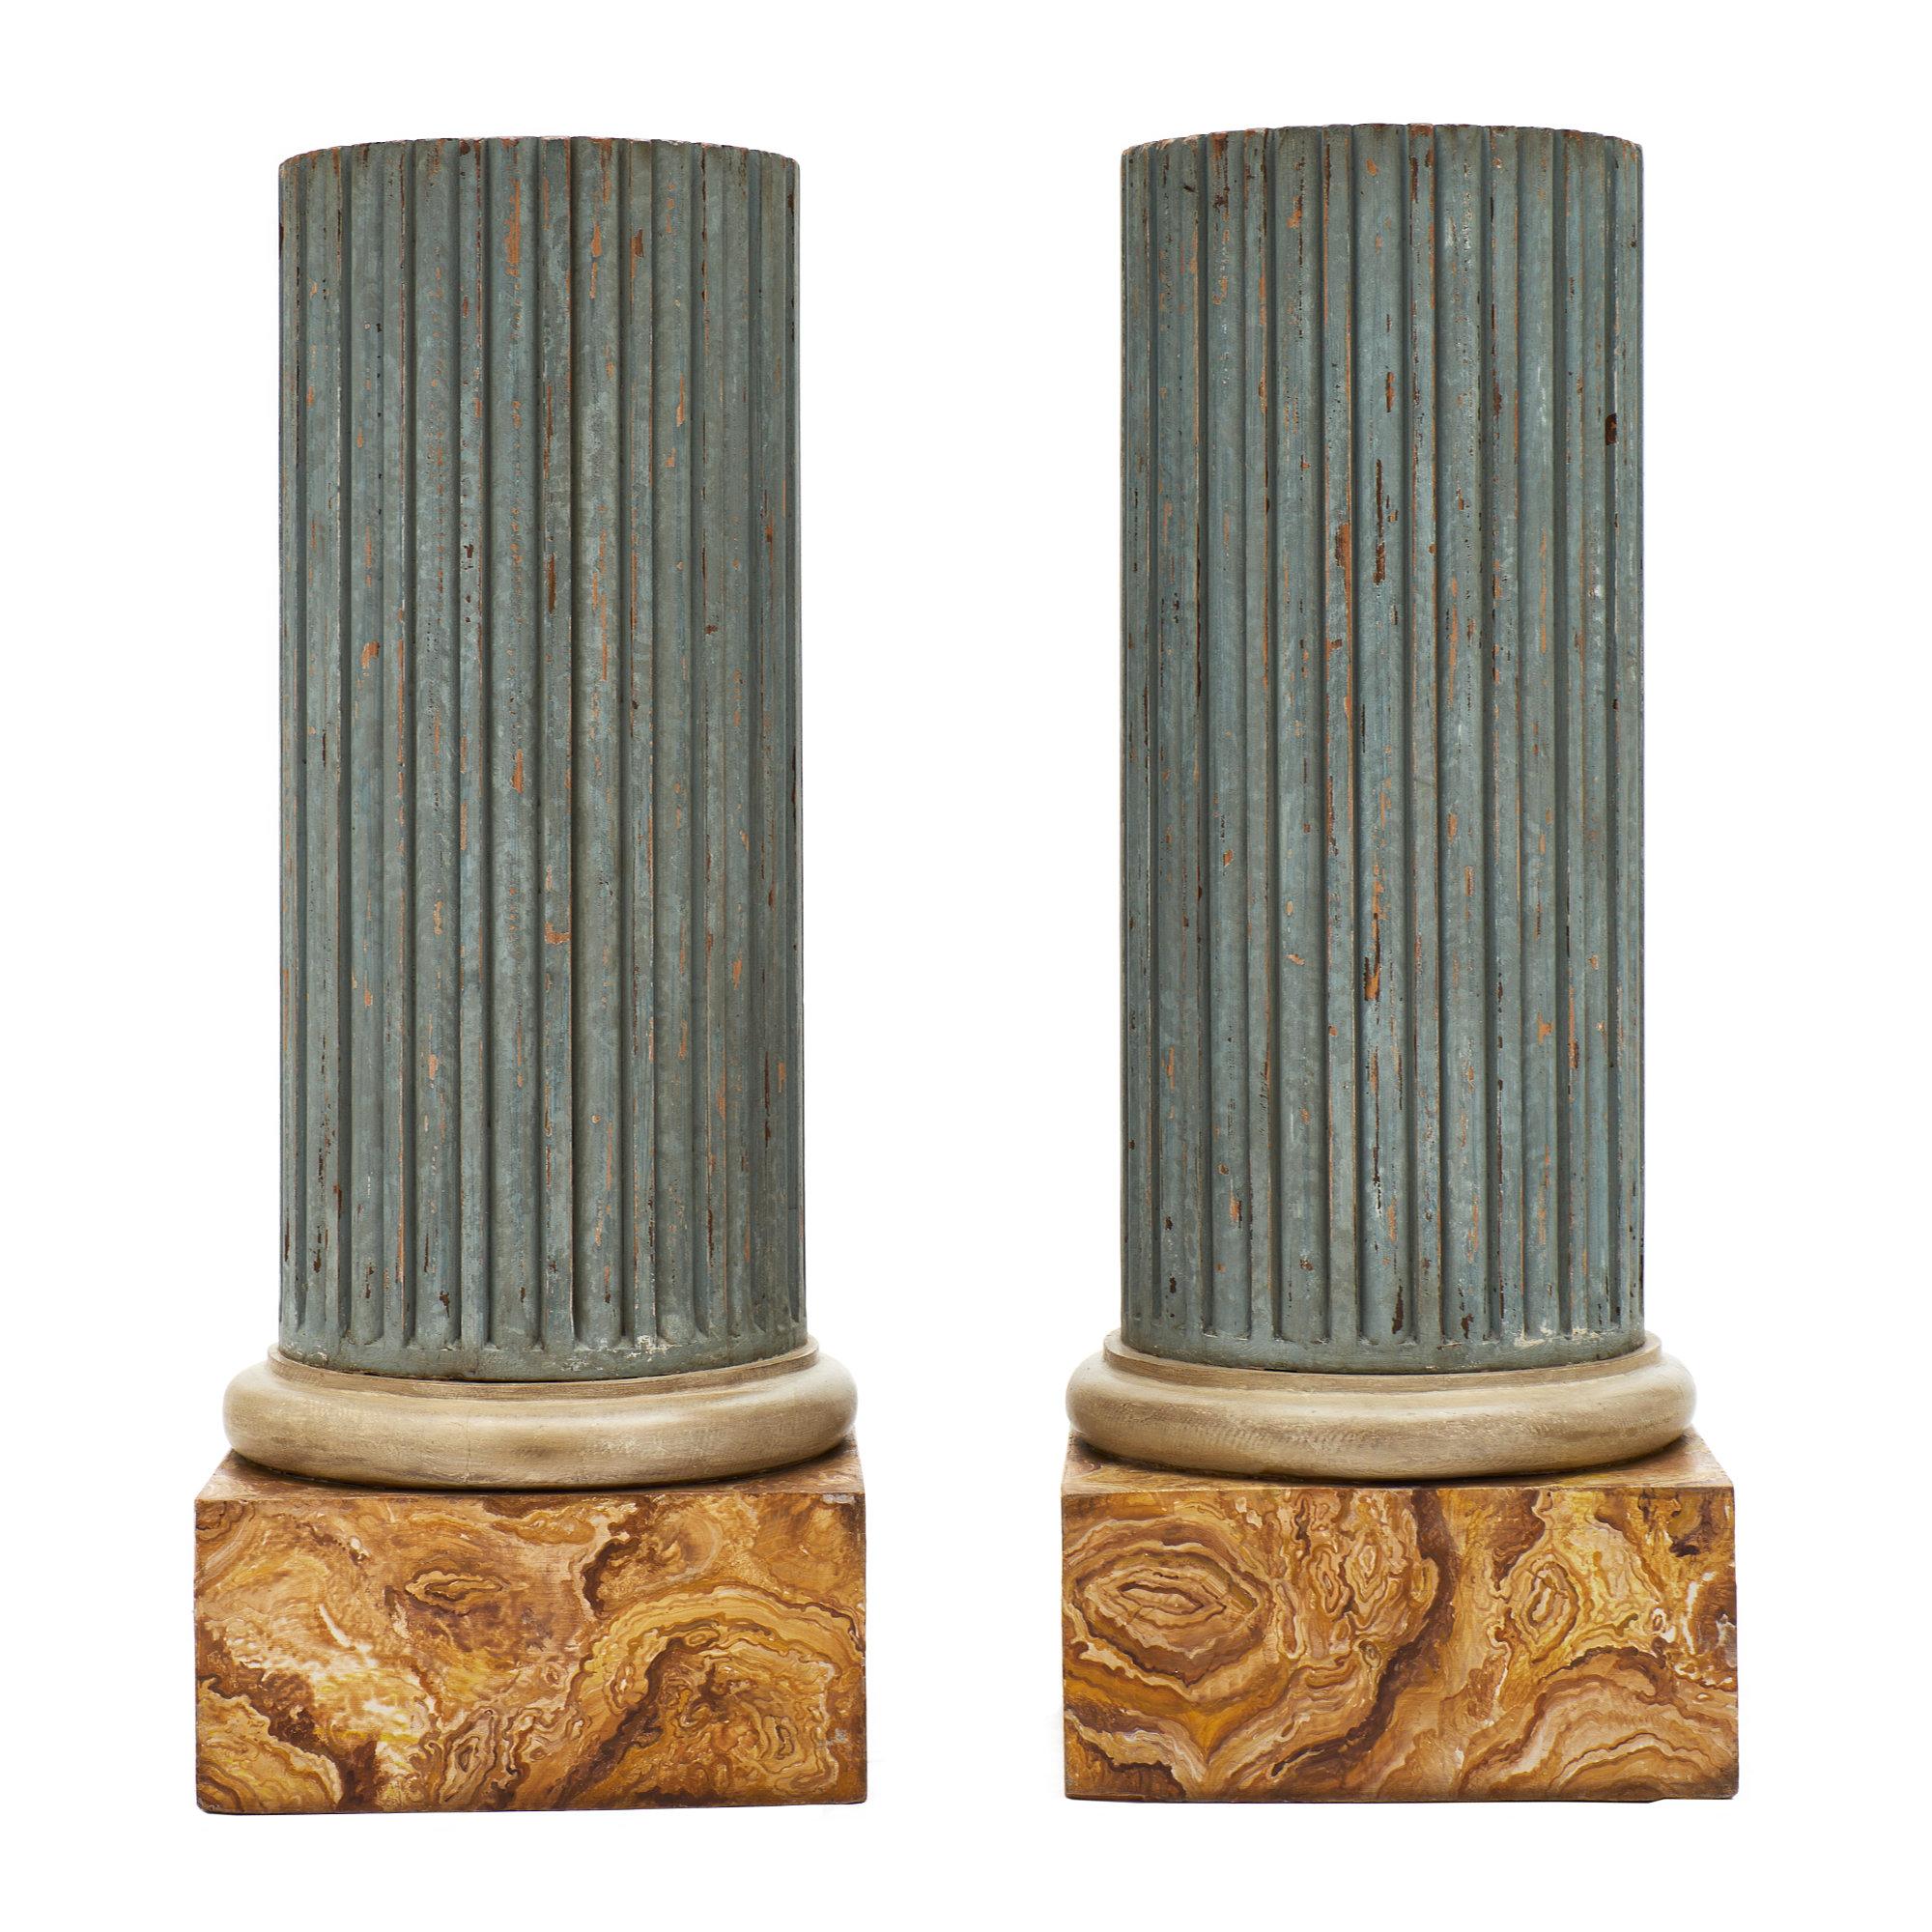 Painted French Antique Columns